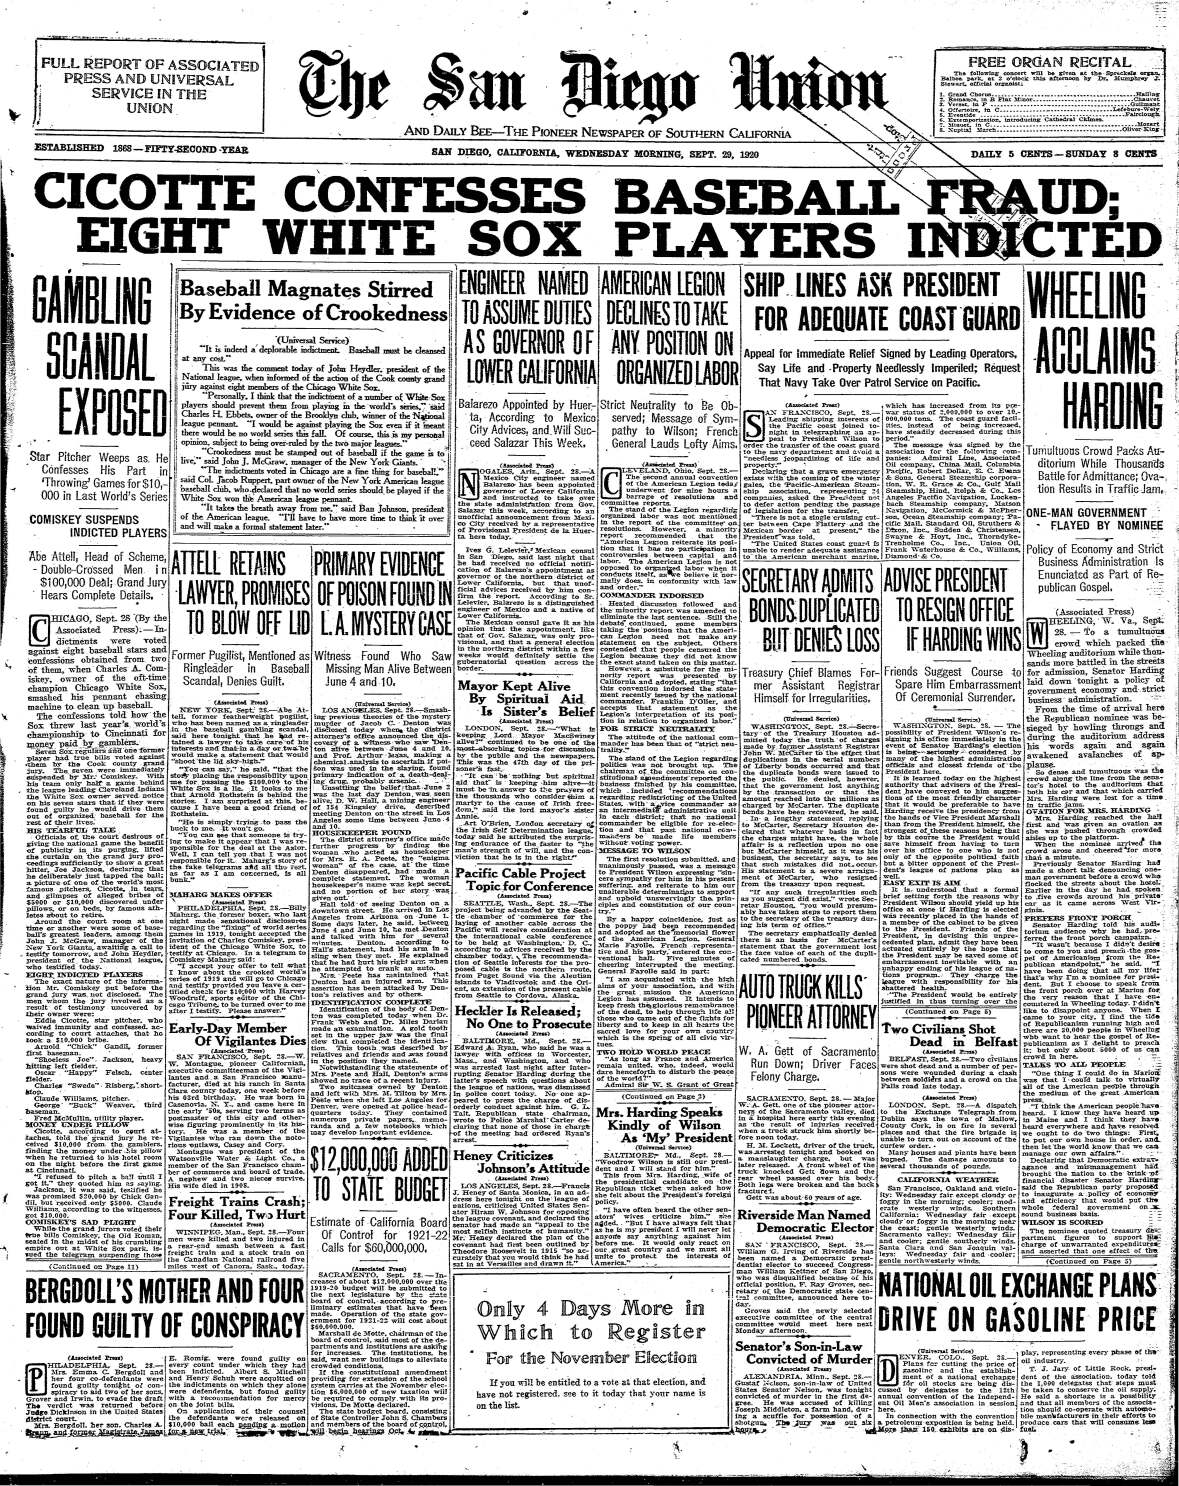 100 years later, we remember baseball's biggest scandal. - Twinkie Town